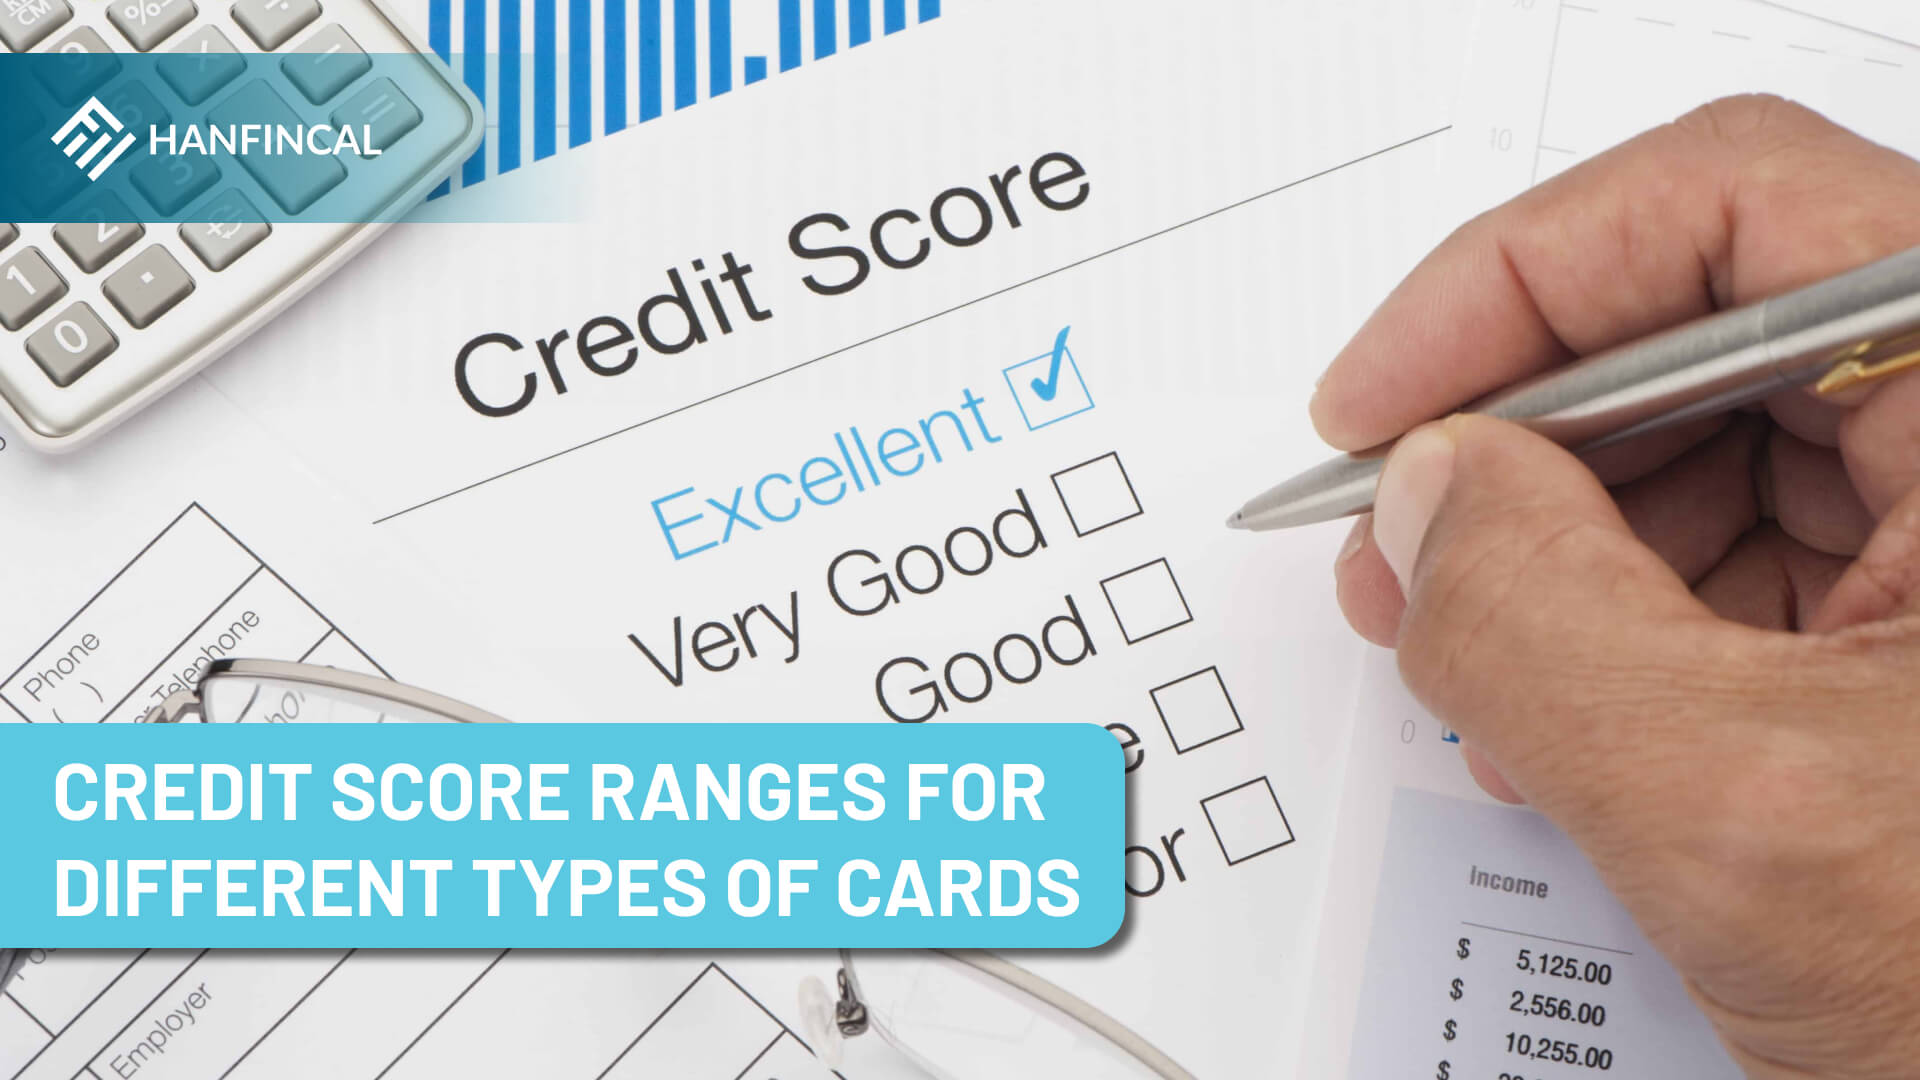 Credit score ranges for different types of cards